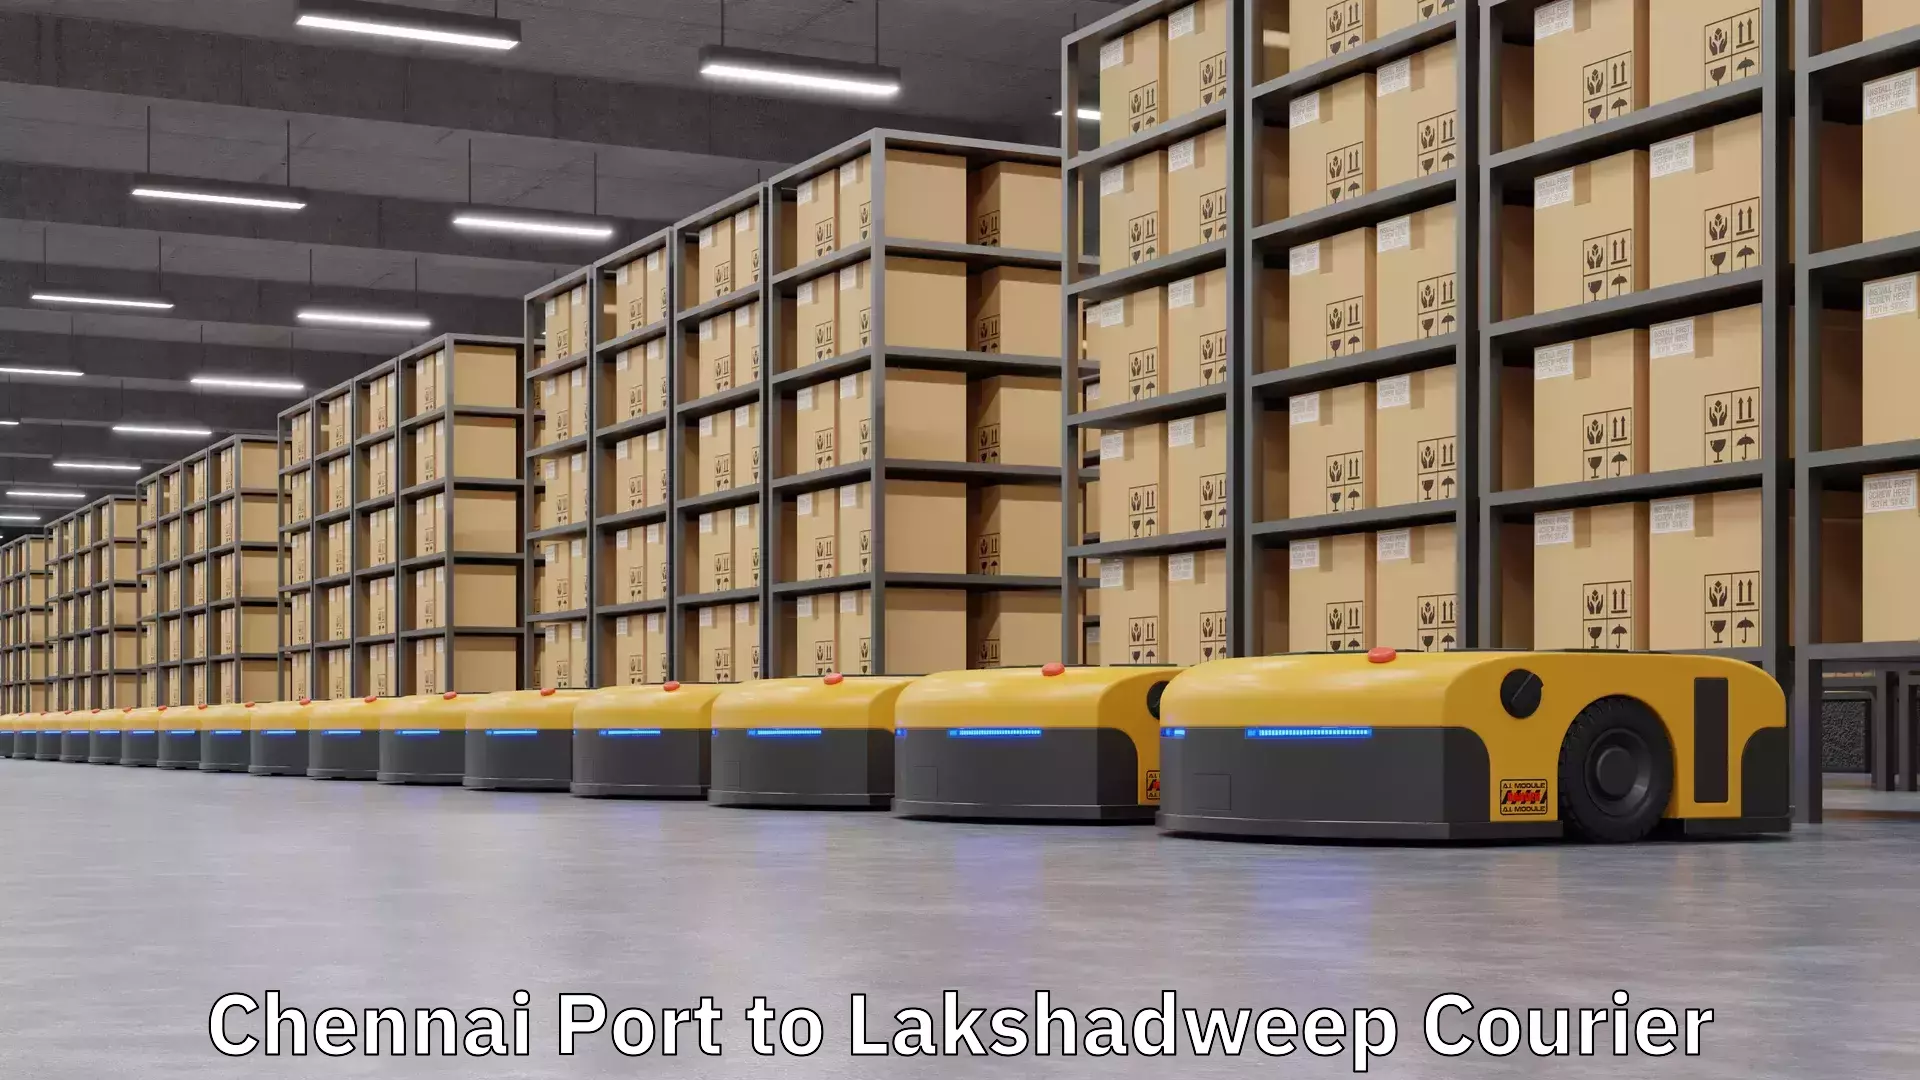 Supply chain delivery in Chennai Port to Lakshadweep